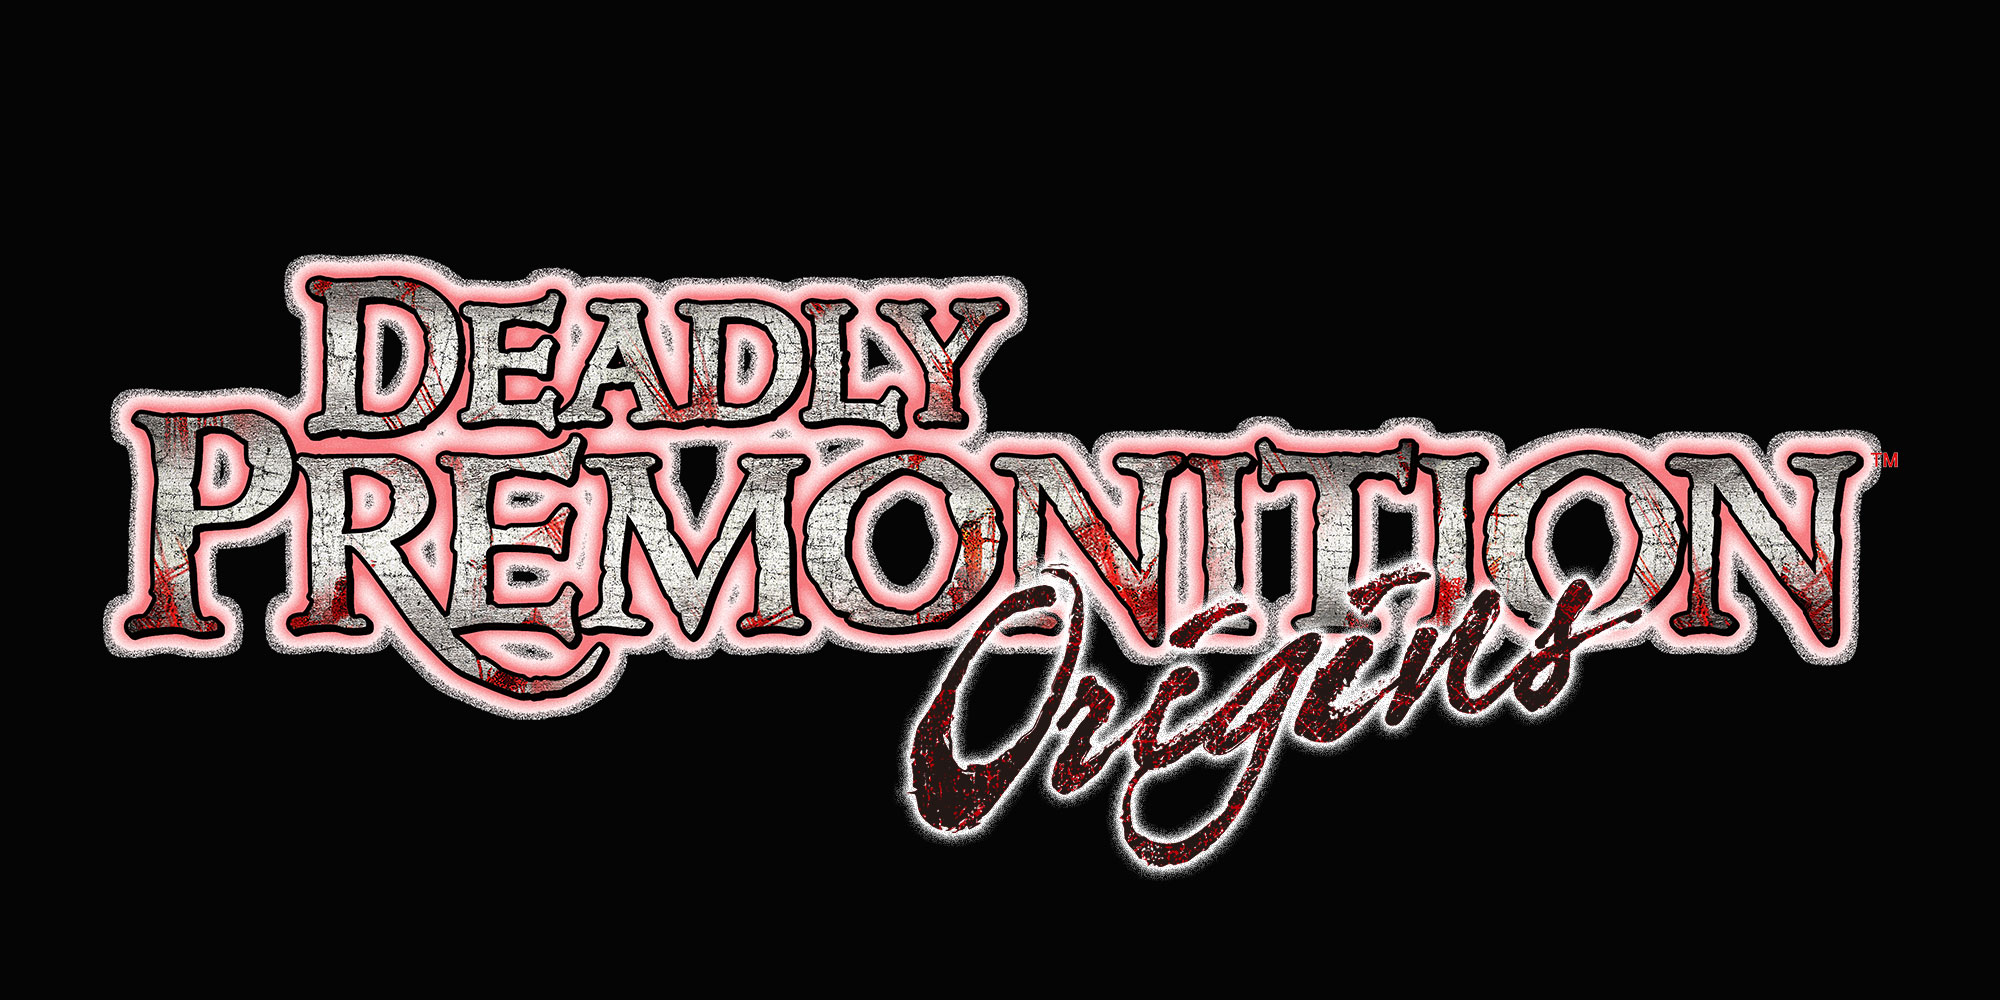 download nintendo switch deadly premonition for free